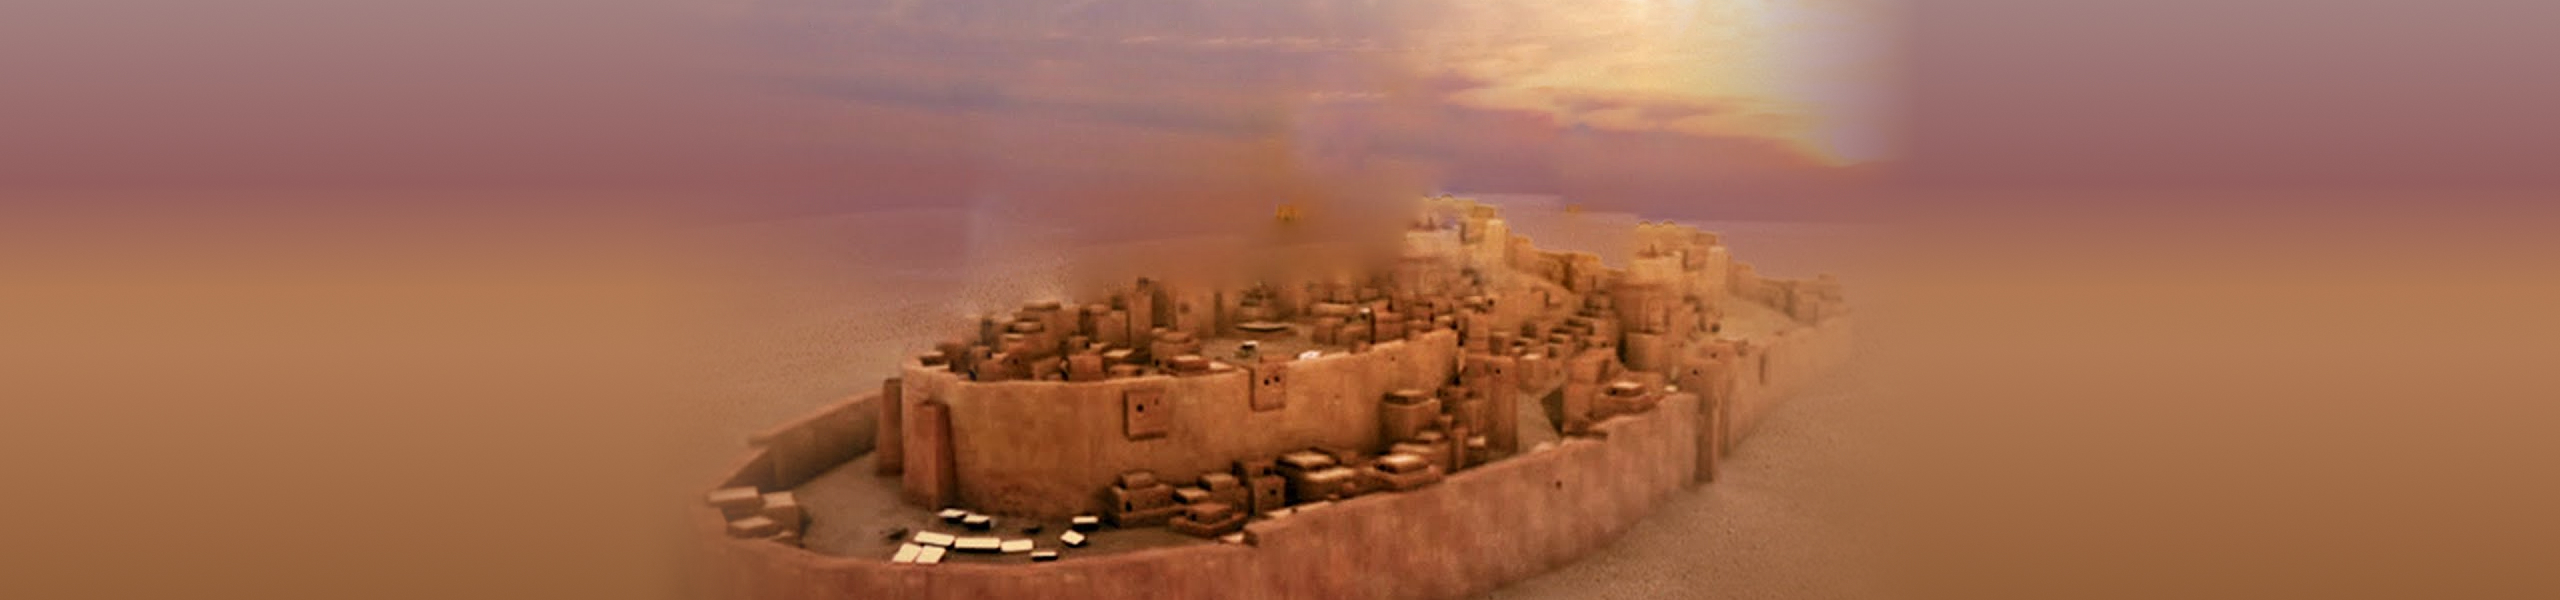 The Fall Of Jericho